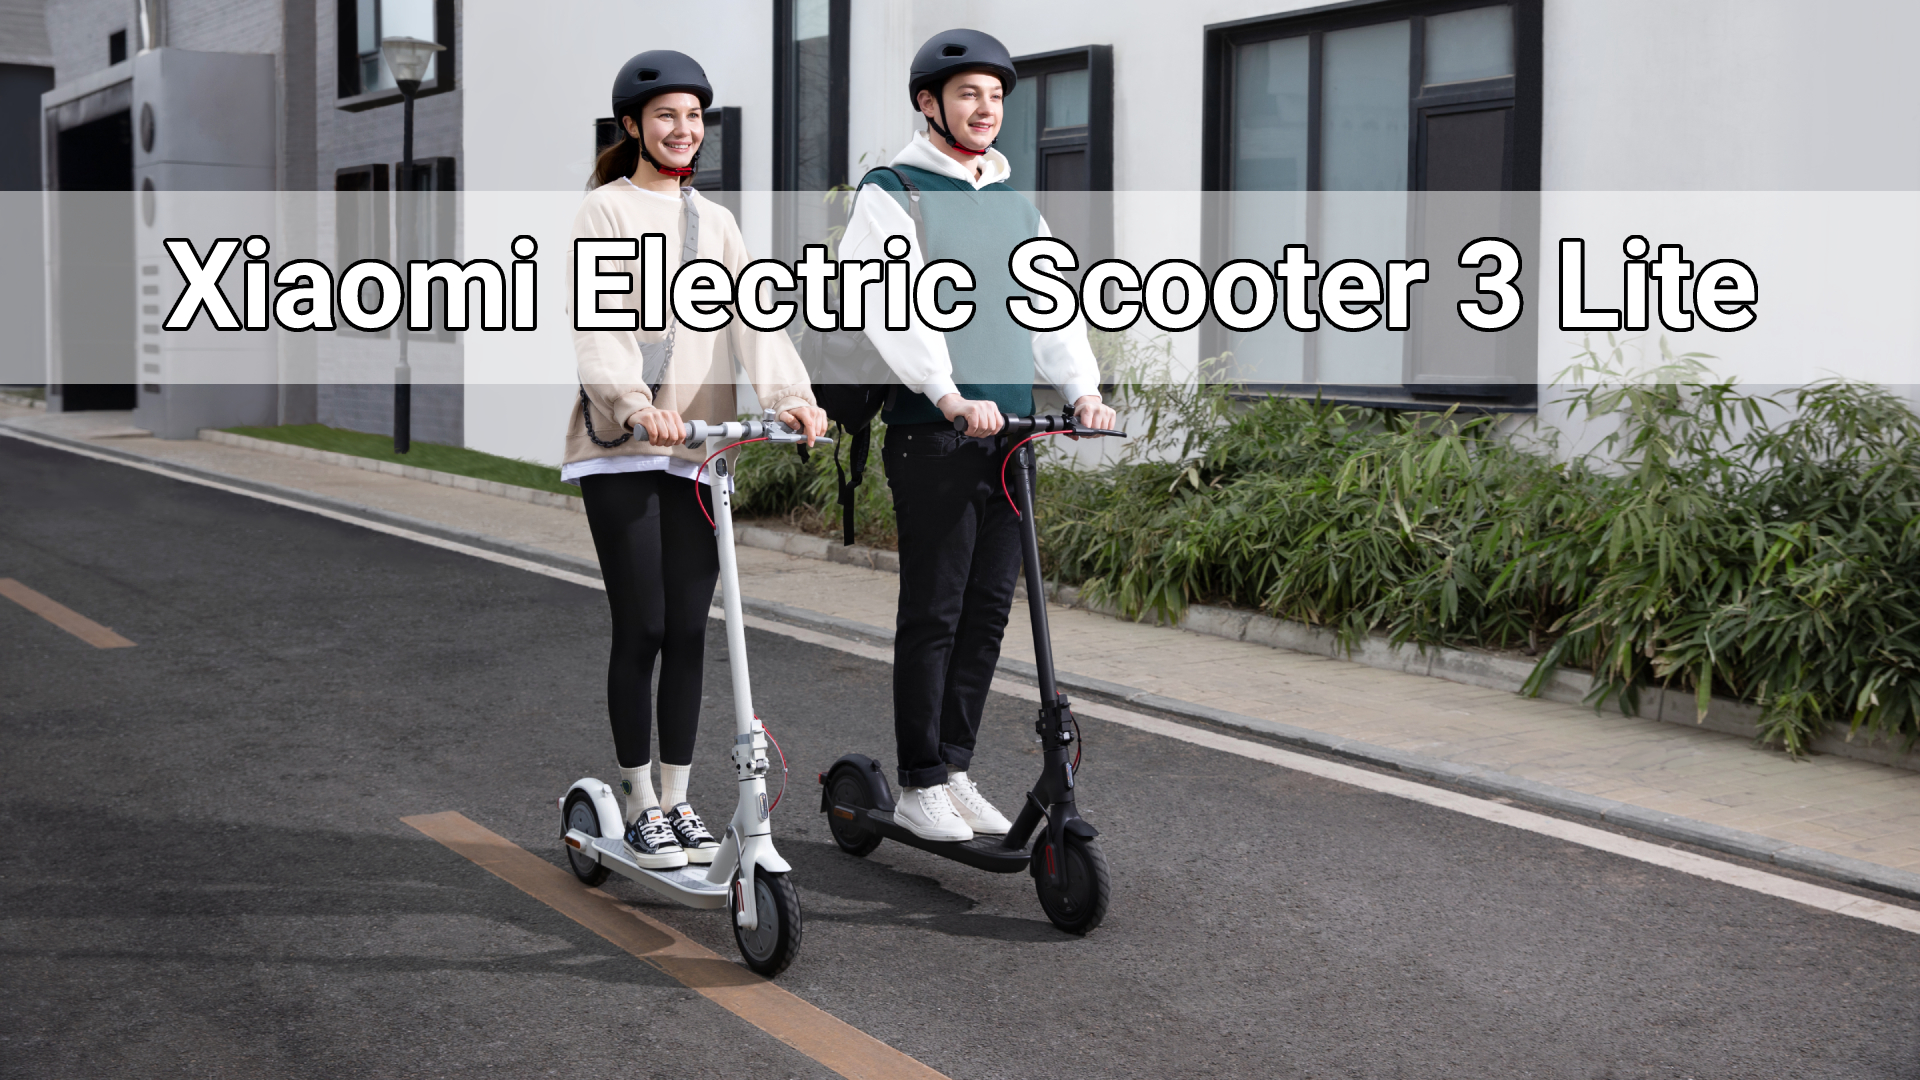 Xiaomi Electric Scooter 3 Lite - easy transport